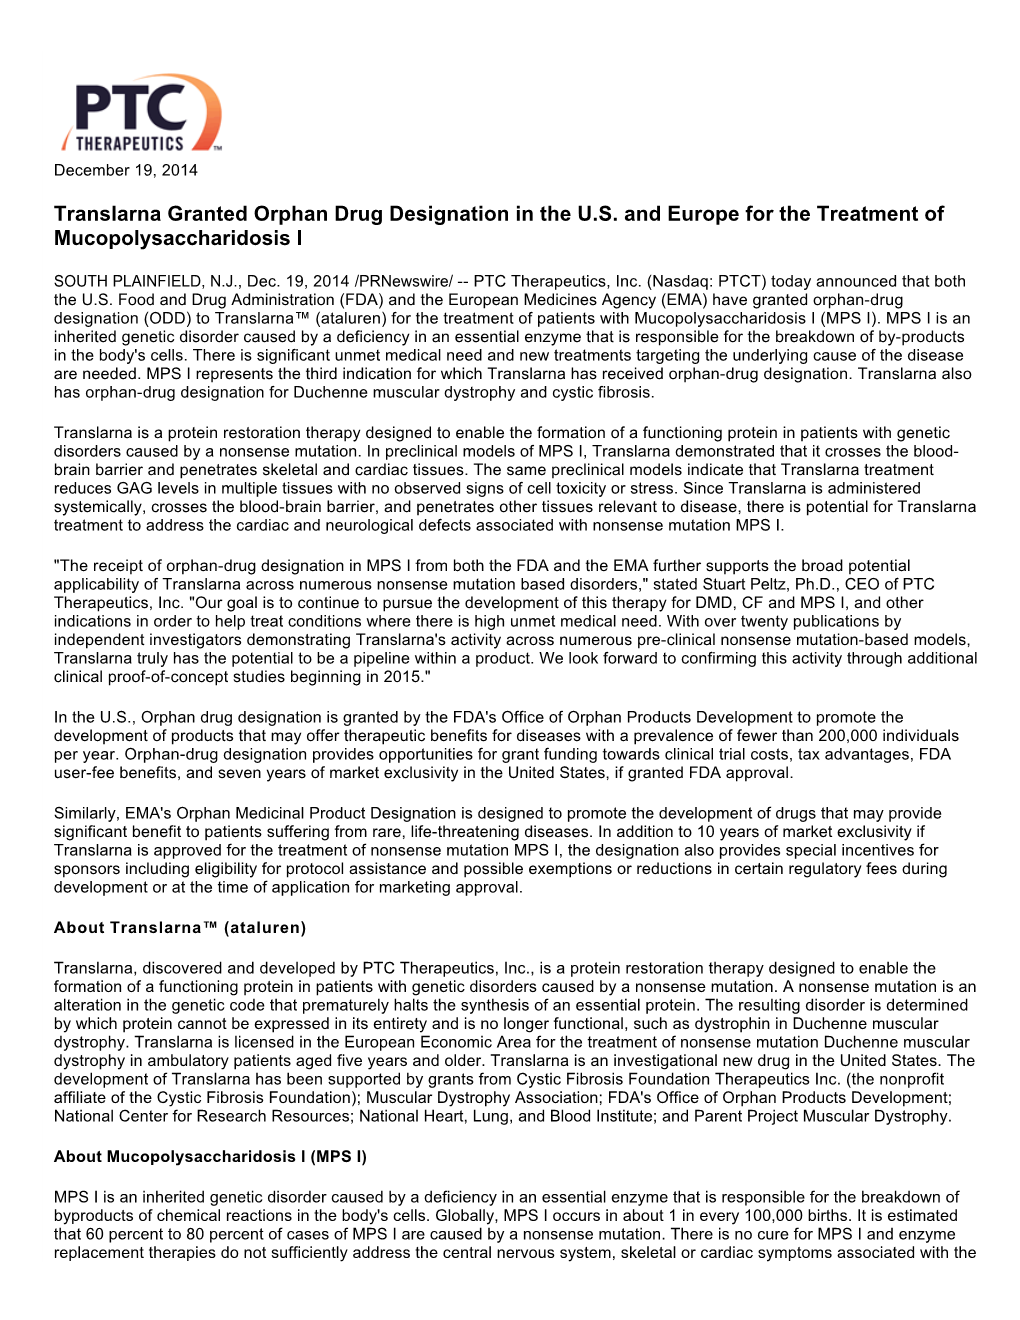 Translarna Granted Orphan Drug Designation in the U.S. and Europe for the Treatment of Mucopolysaccharidosis I